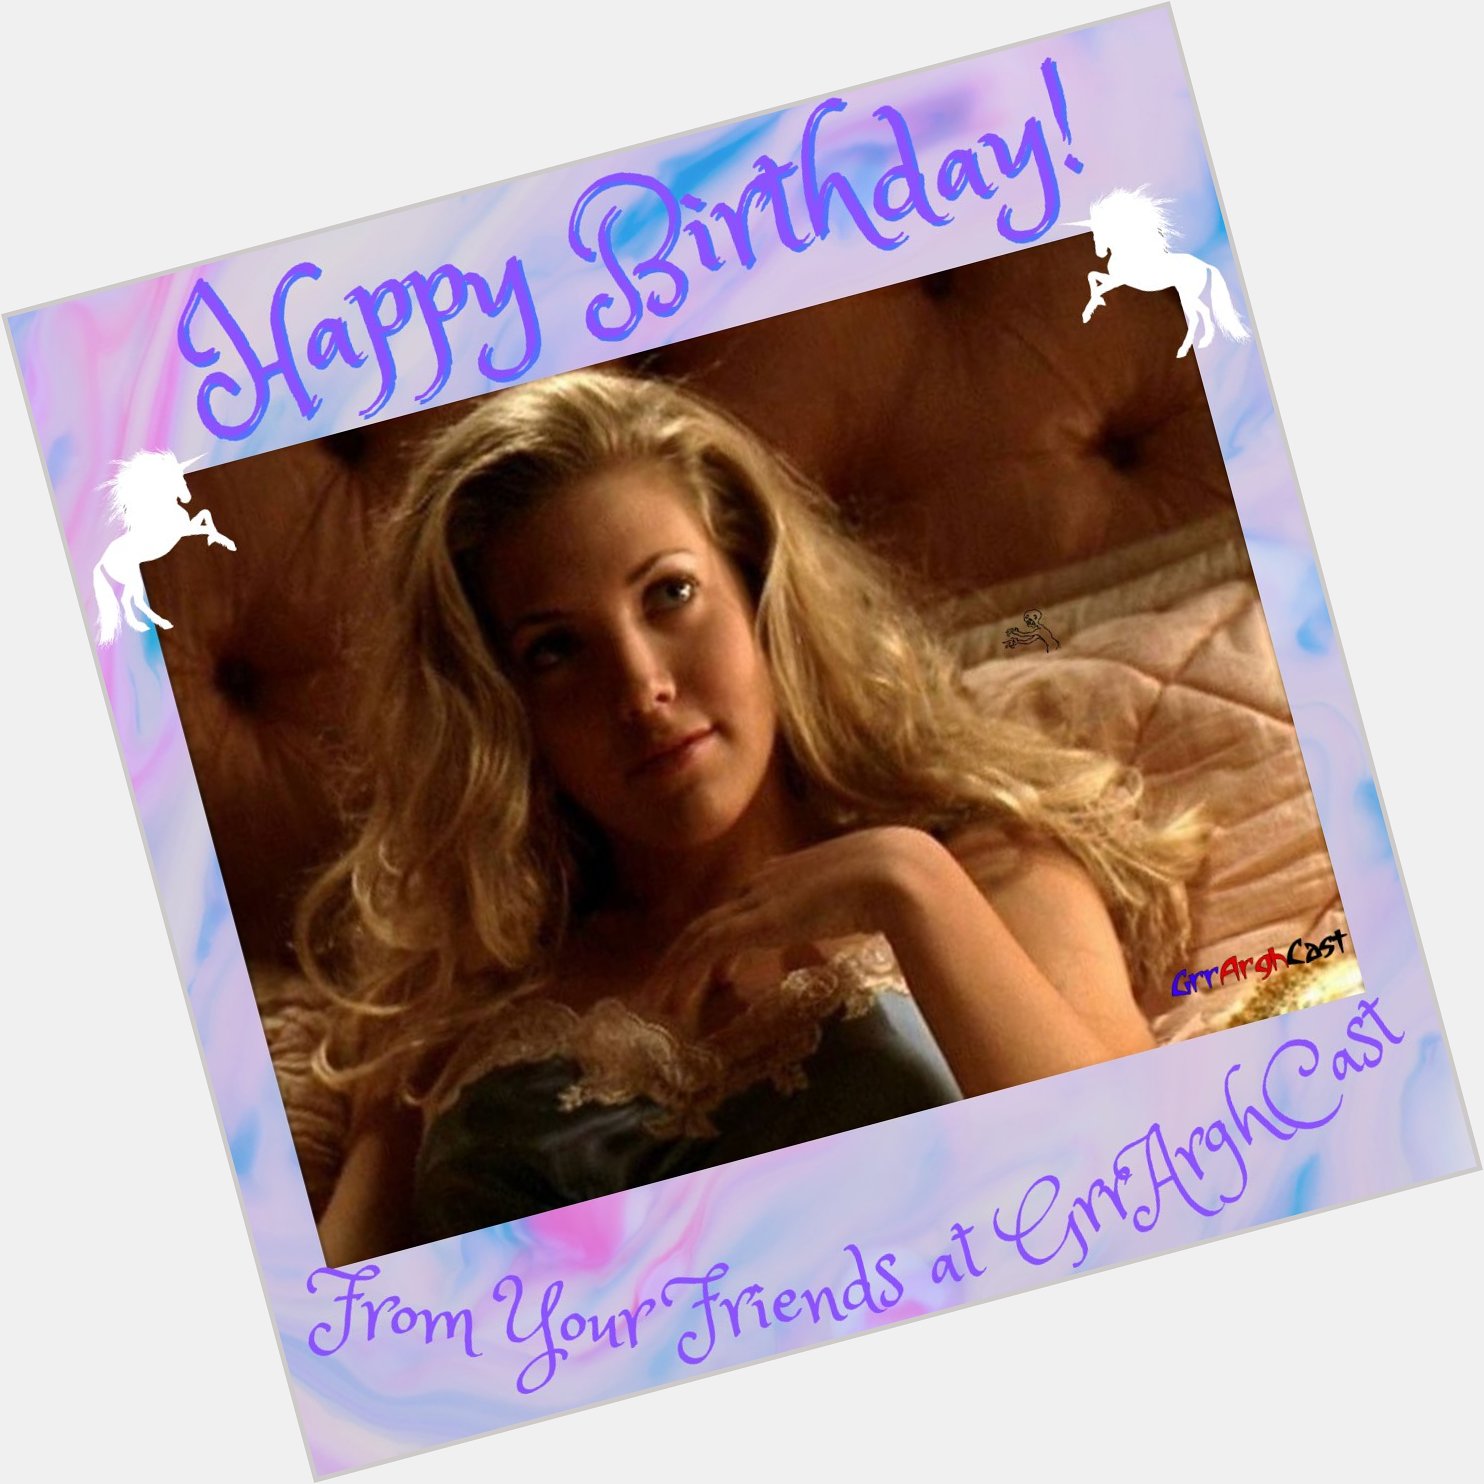 Wishing a very happy birthday to the stunningly beautiful and incredibly talented, Mercedes McNab! 